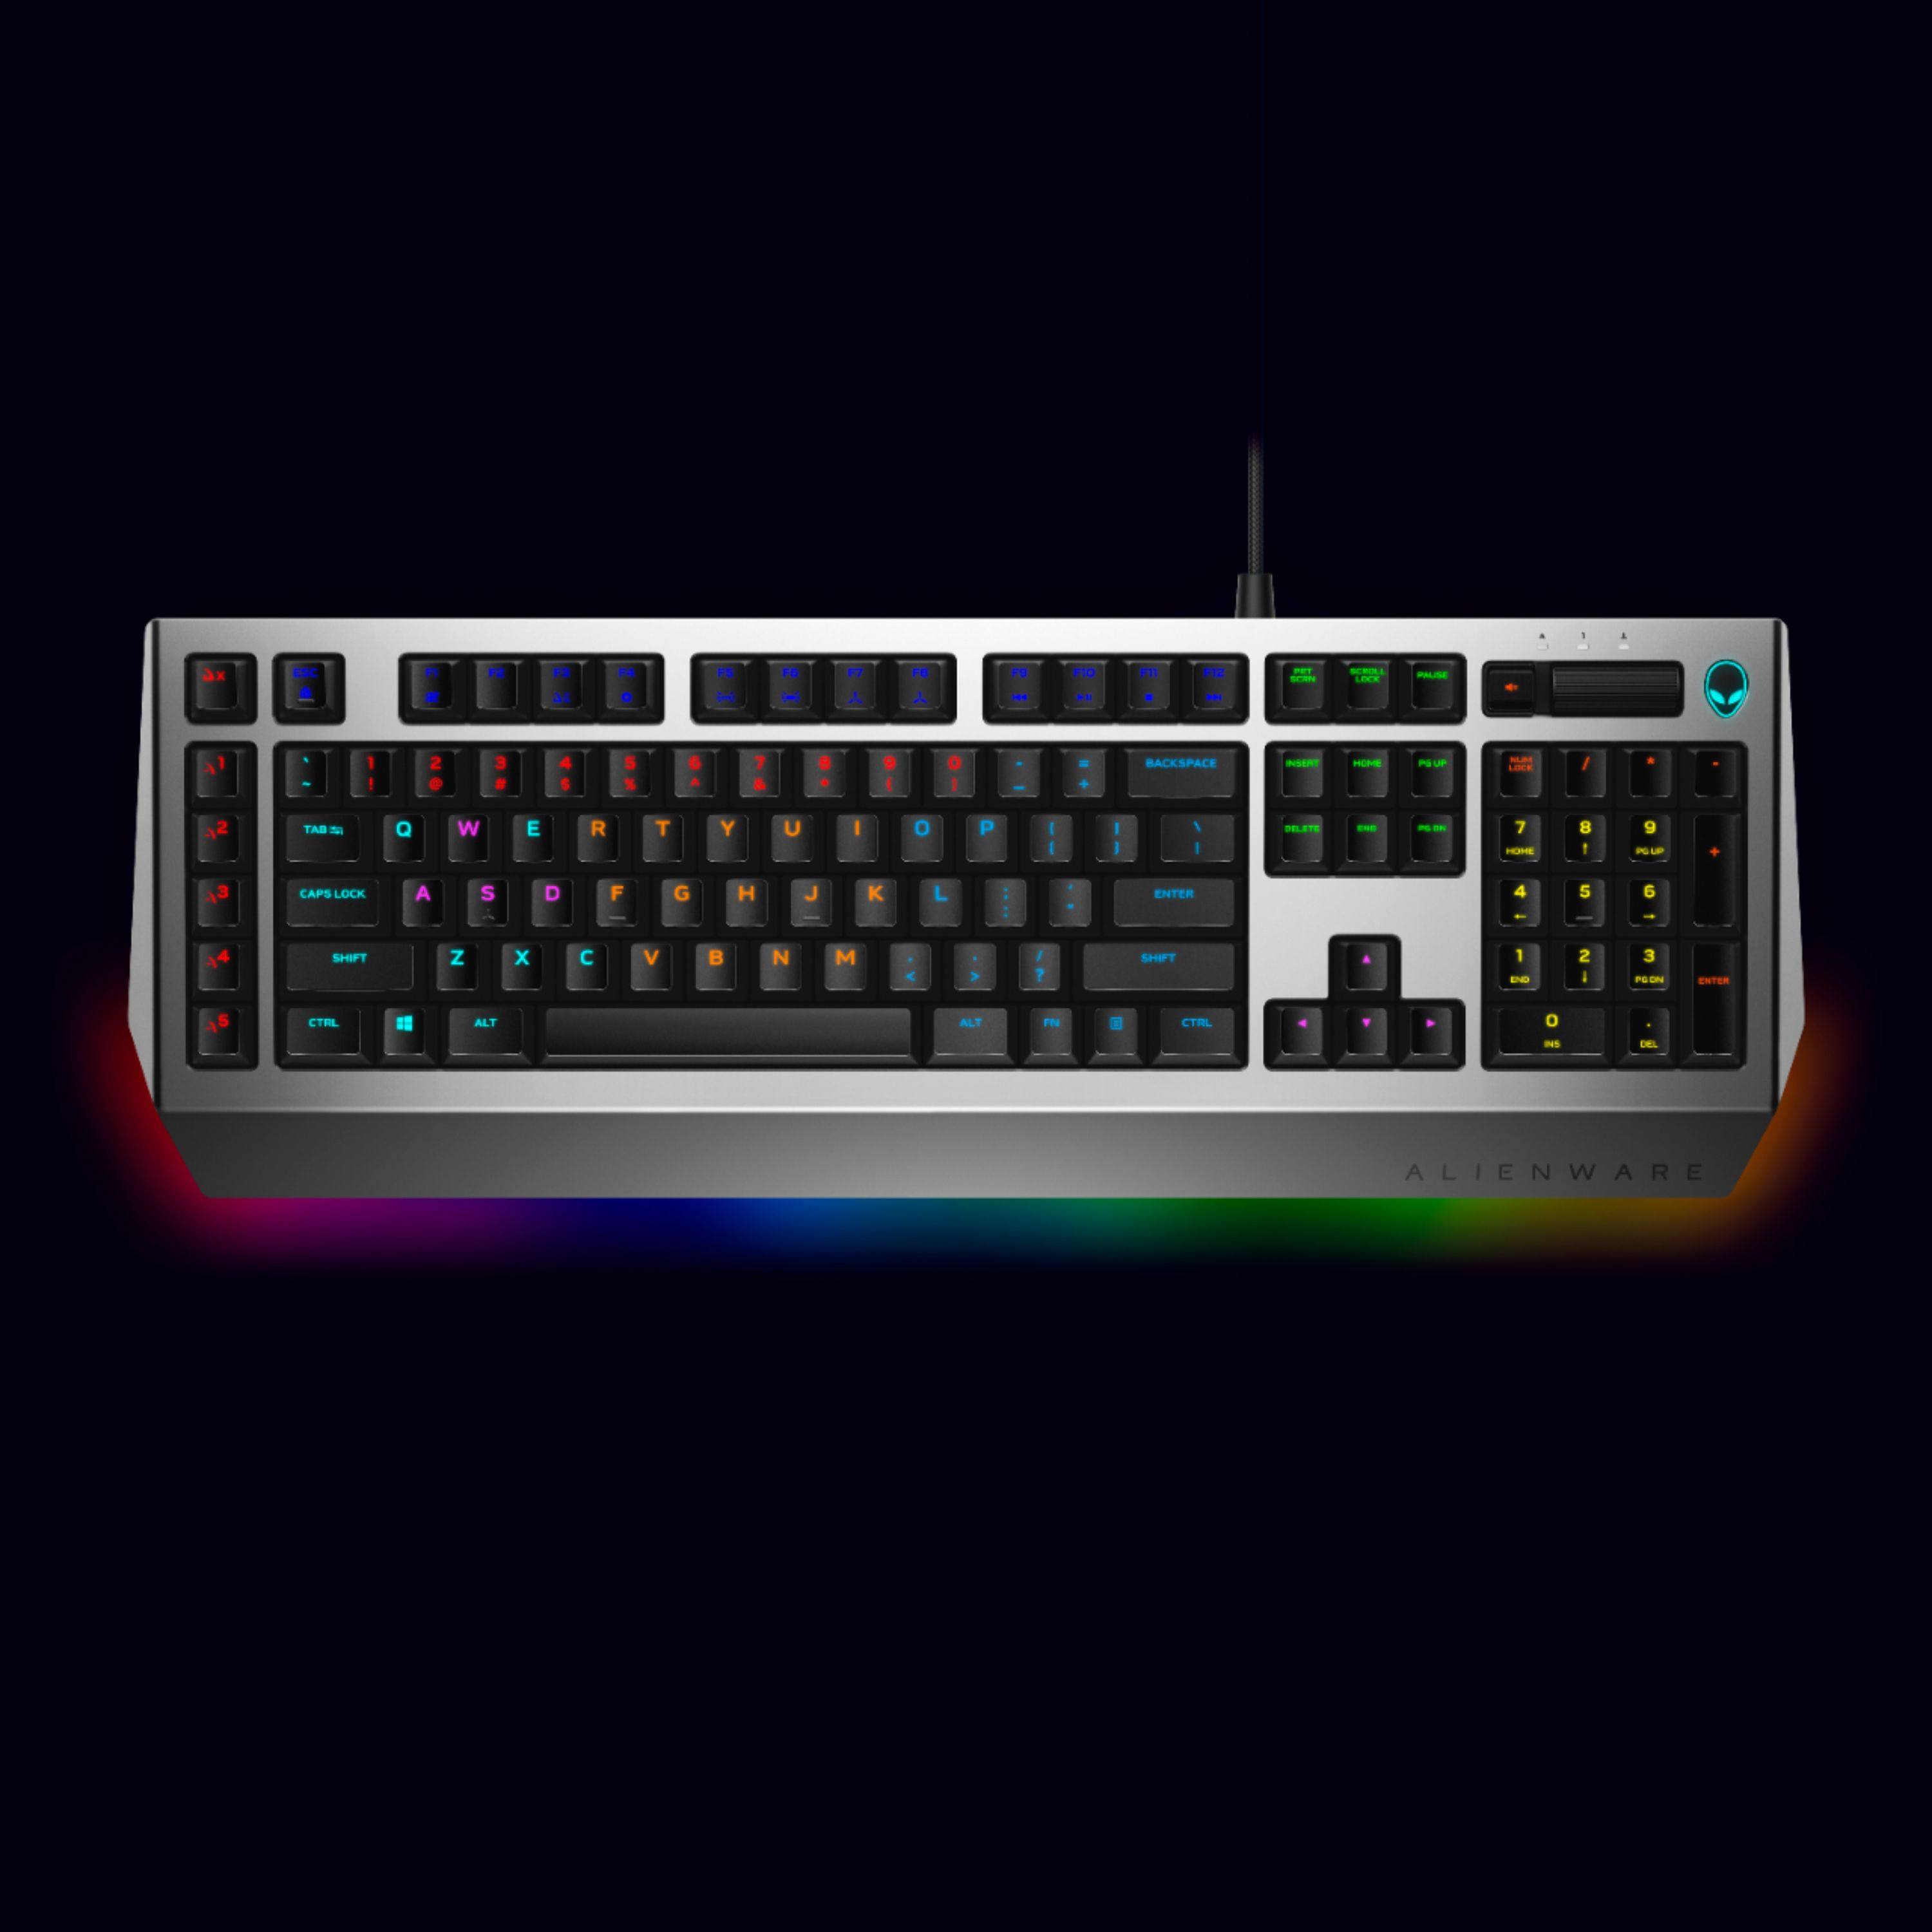 Dell Alienware Pro AW768 Gaming Keyboard 